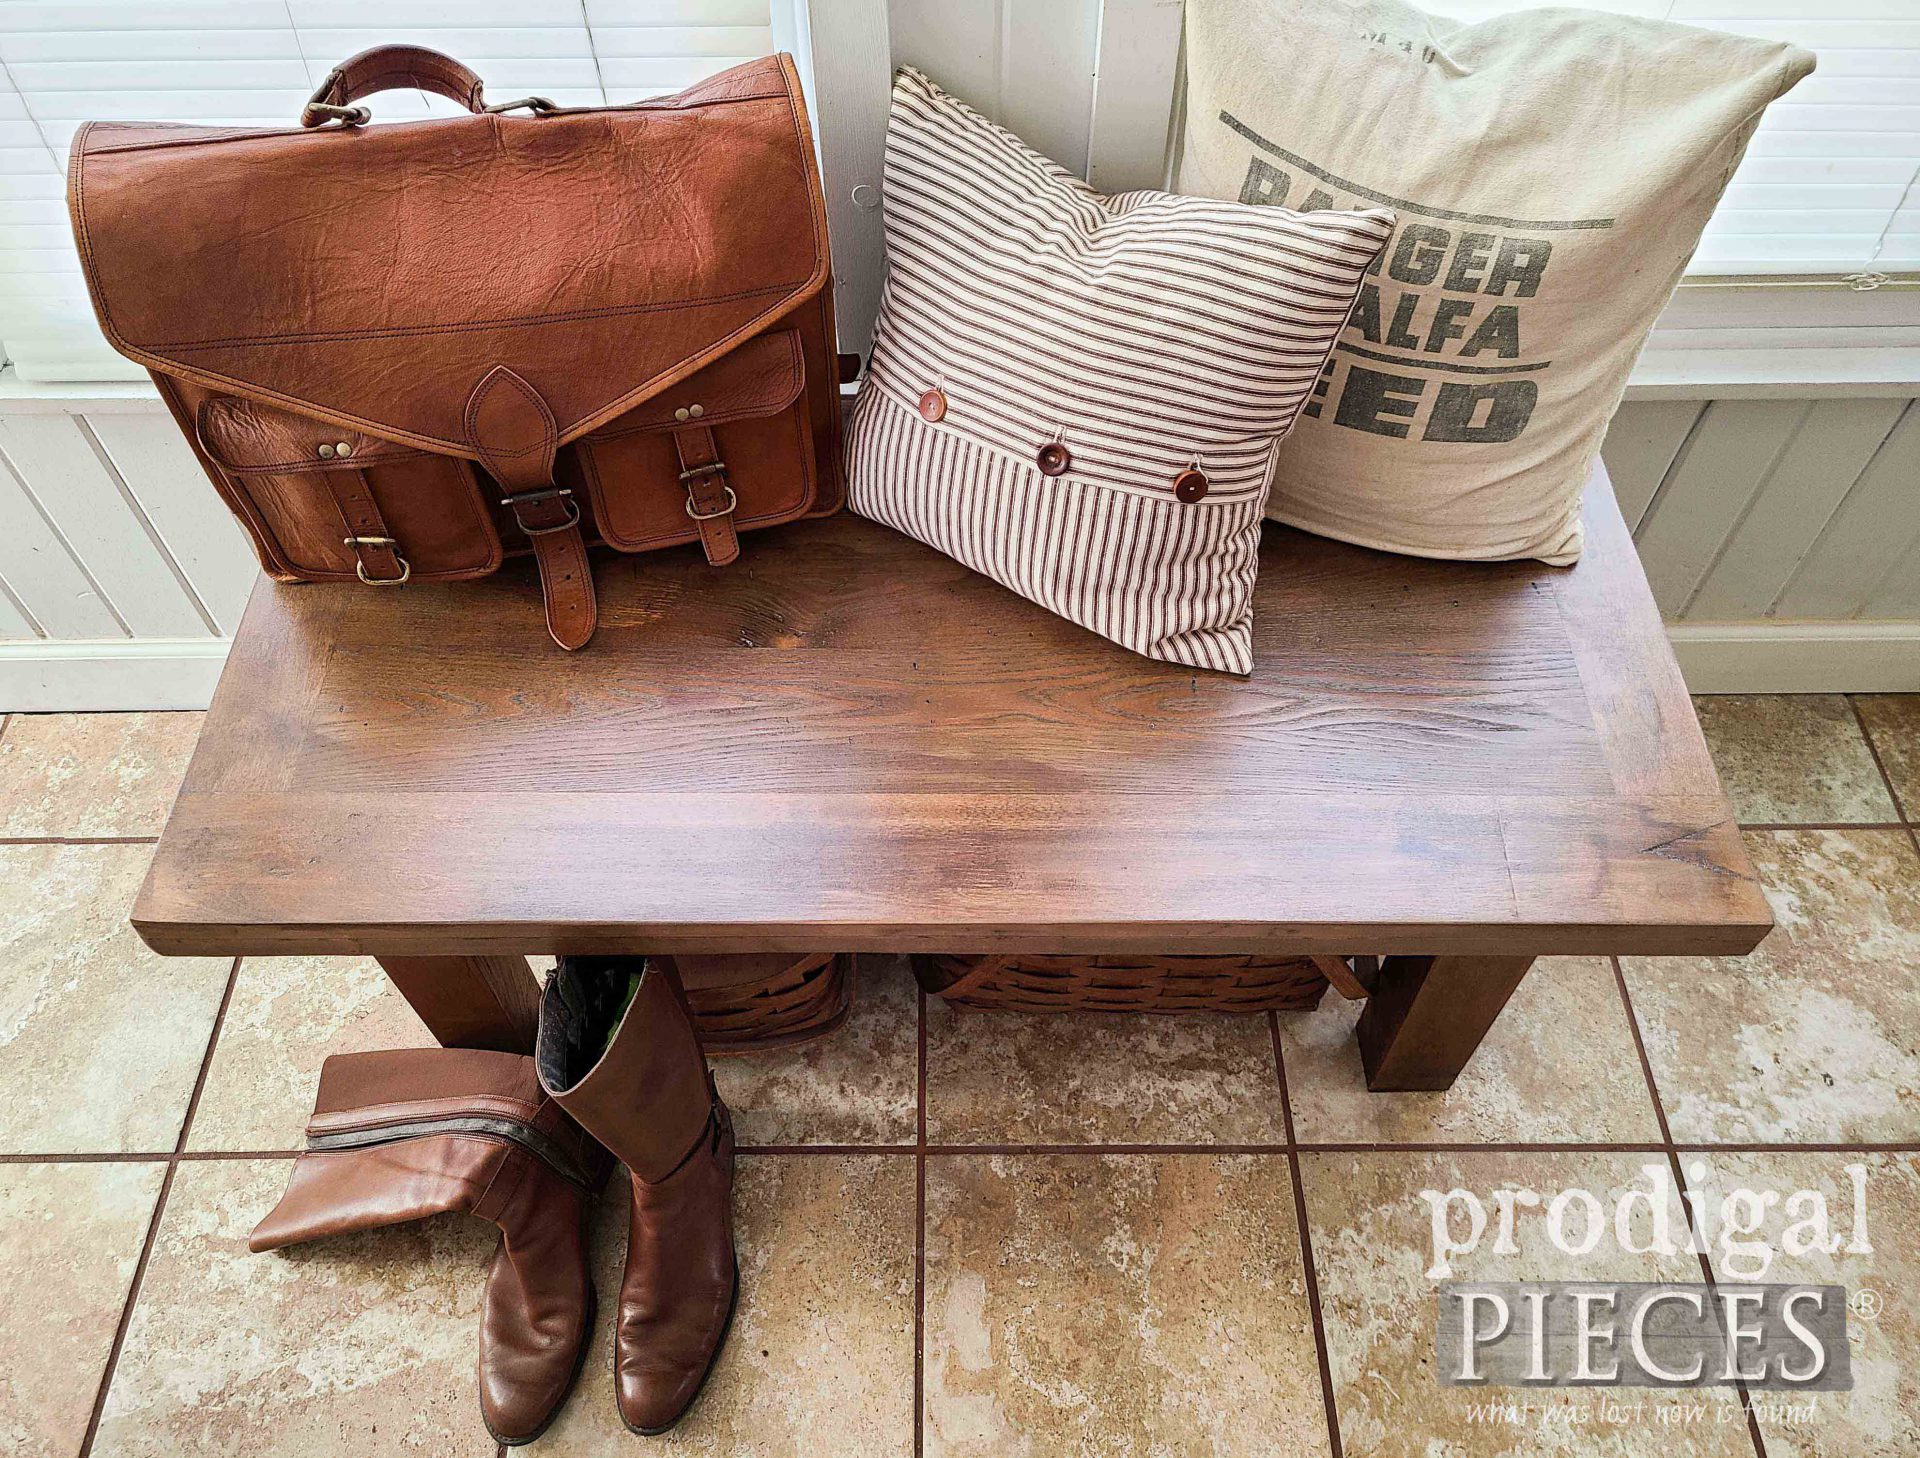 Top of Reclaimed Bench Built by Larissa of Prodigal Pieces | prodigalpieces.com #prodigalpieces #home #homedecor